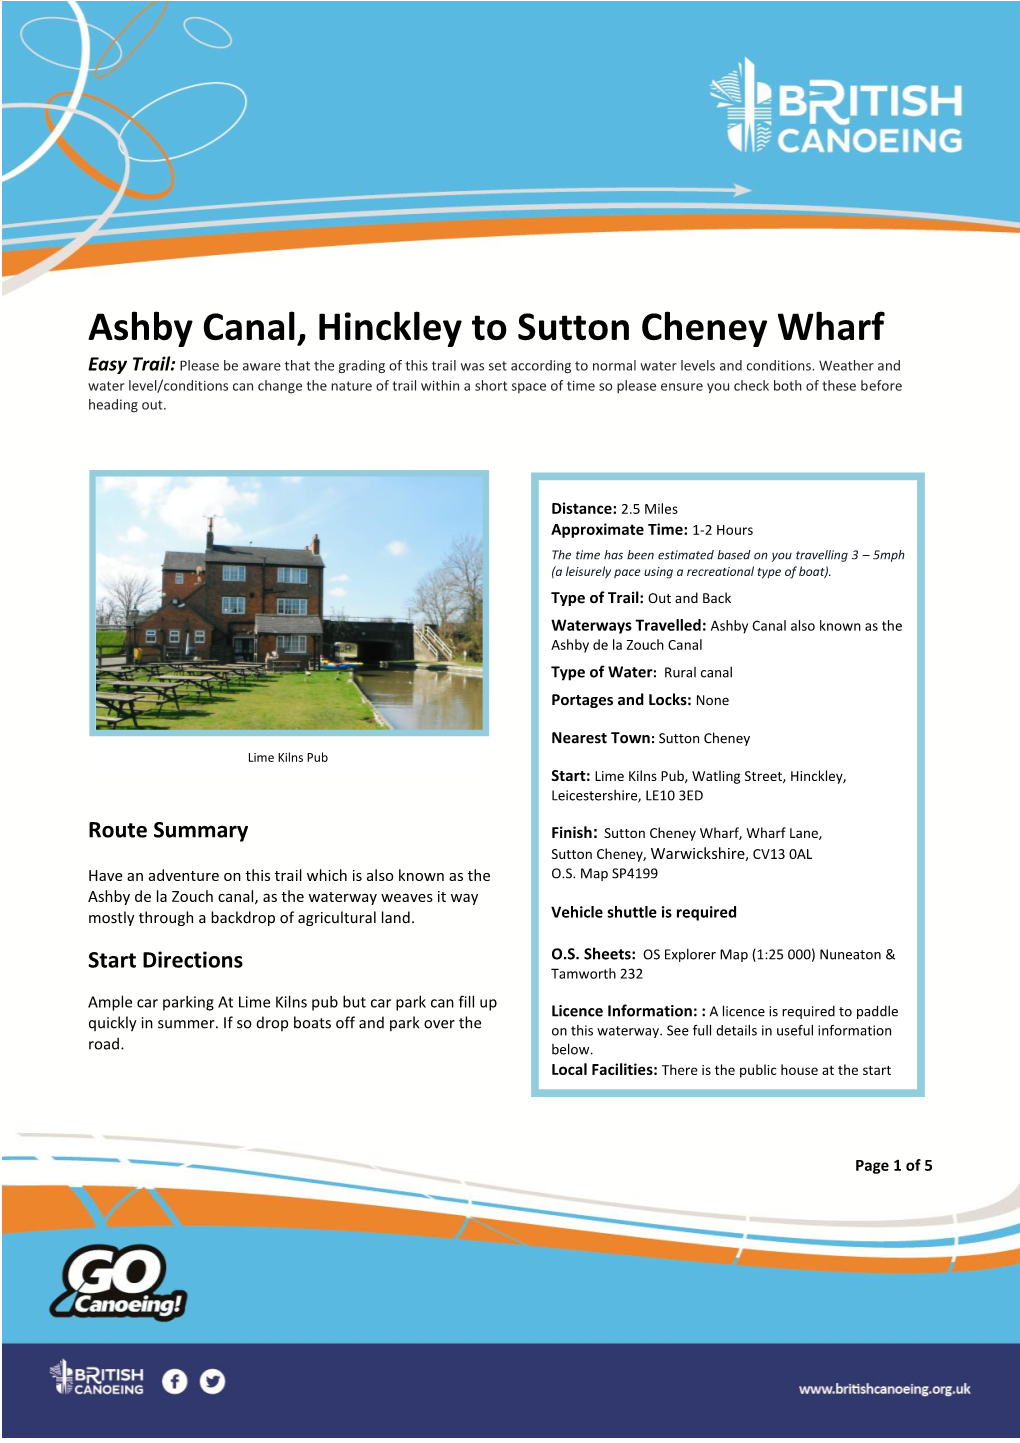 Ashby Canal, Hinckley to Sutton Cheney Wharf Easy Trail: Please Be Aware That the Grading of This Trail Was Set According to Normal Water Levels and Conditions